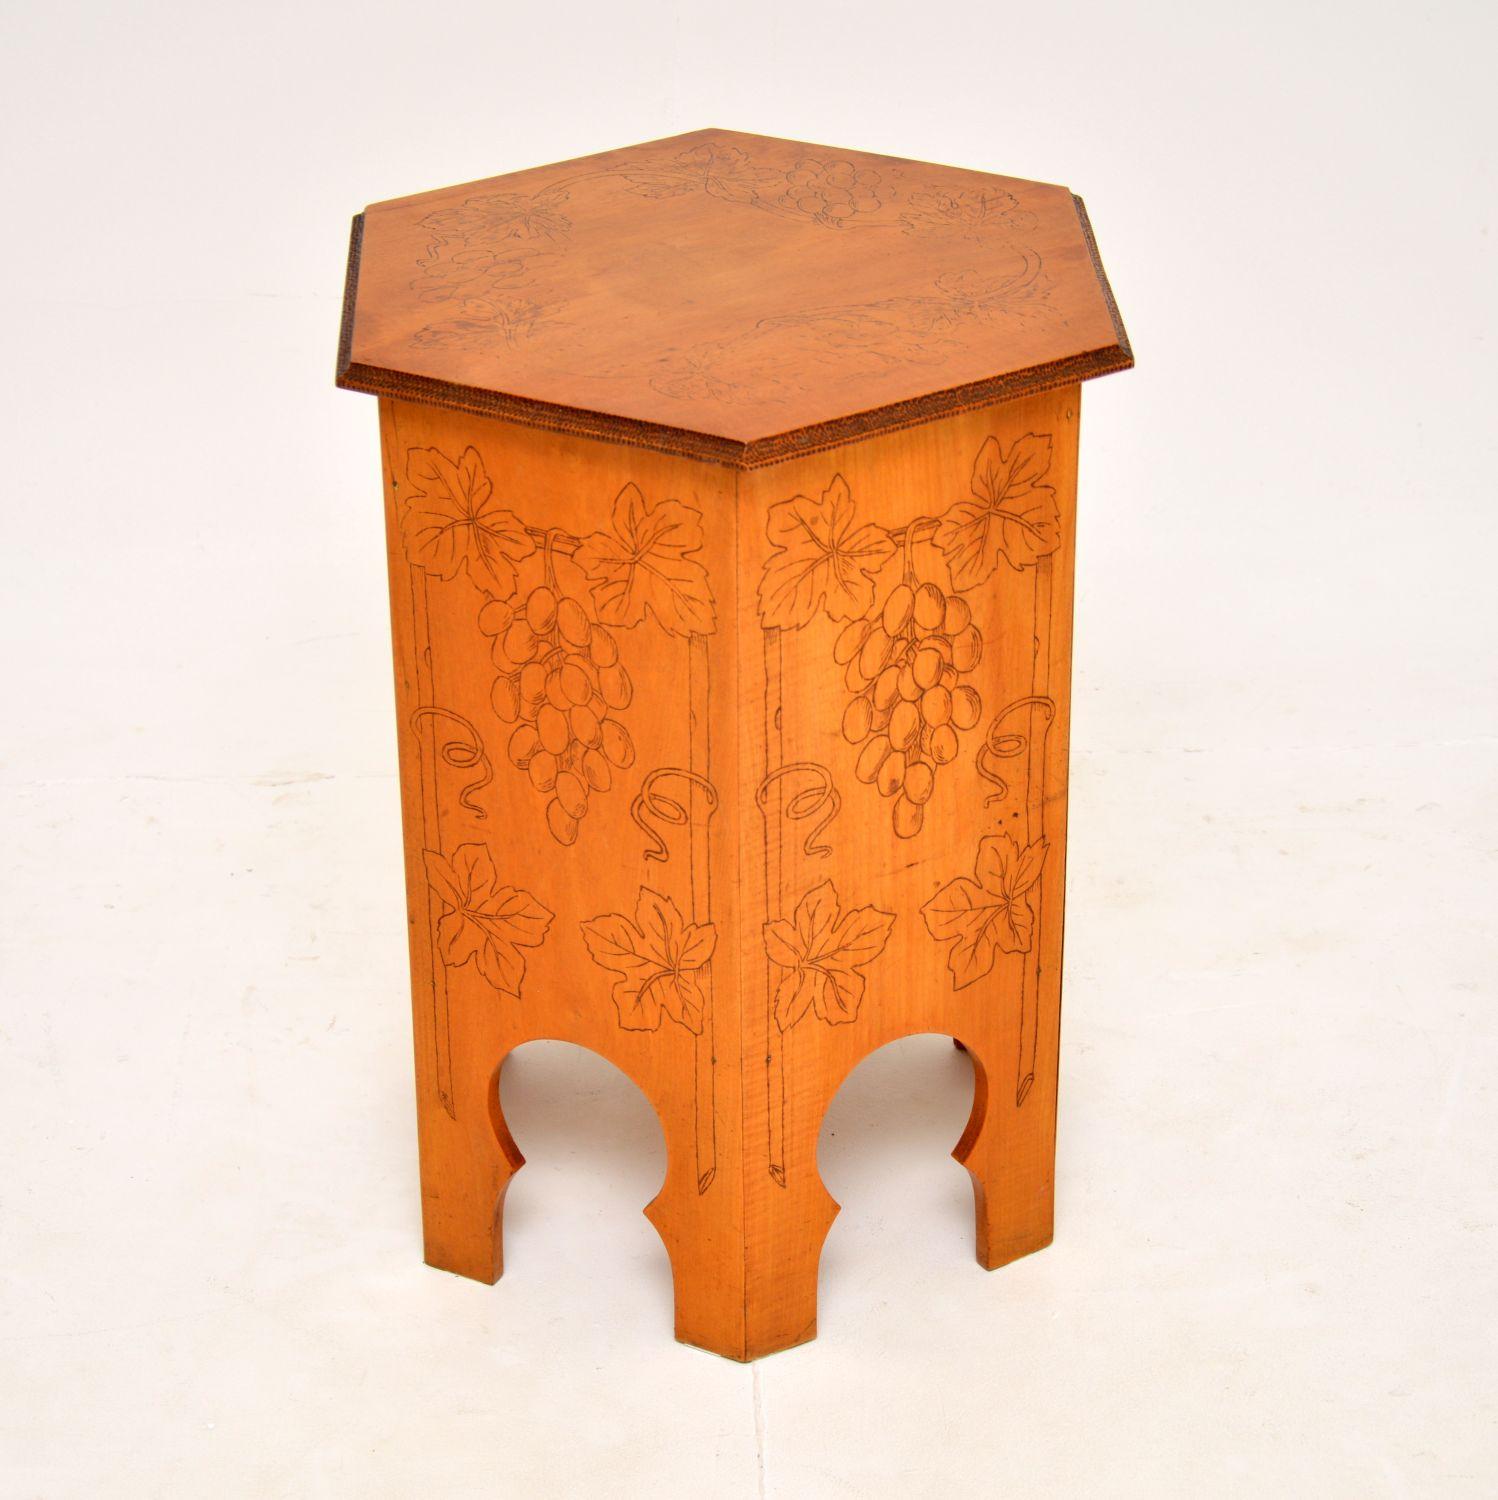 A beautiful and unusual antique wine cooler table with a lift up lid, in solid birch. This was likely made in the 1920’s, it has a typical Moorish influence in the design. It is dated on the bottom, 4/7/28.

It has a gorgeous shape and is a useful